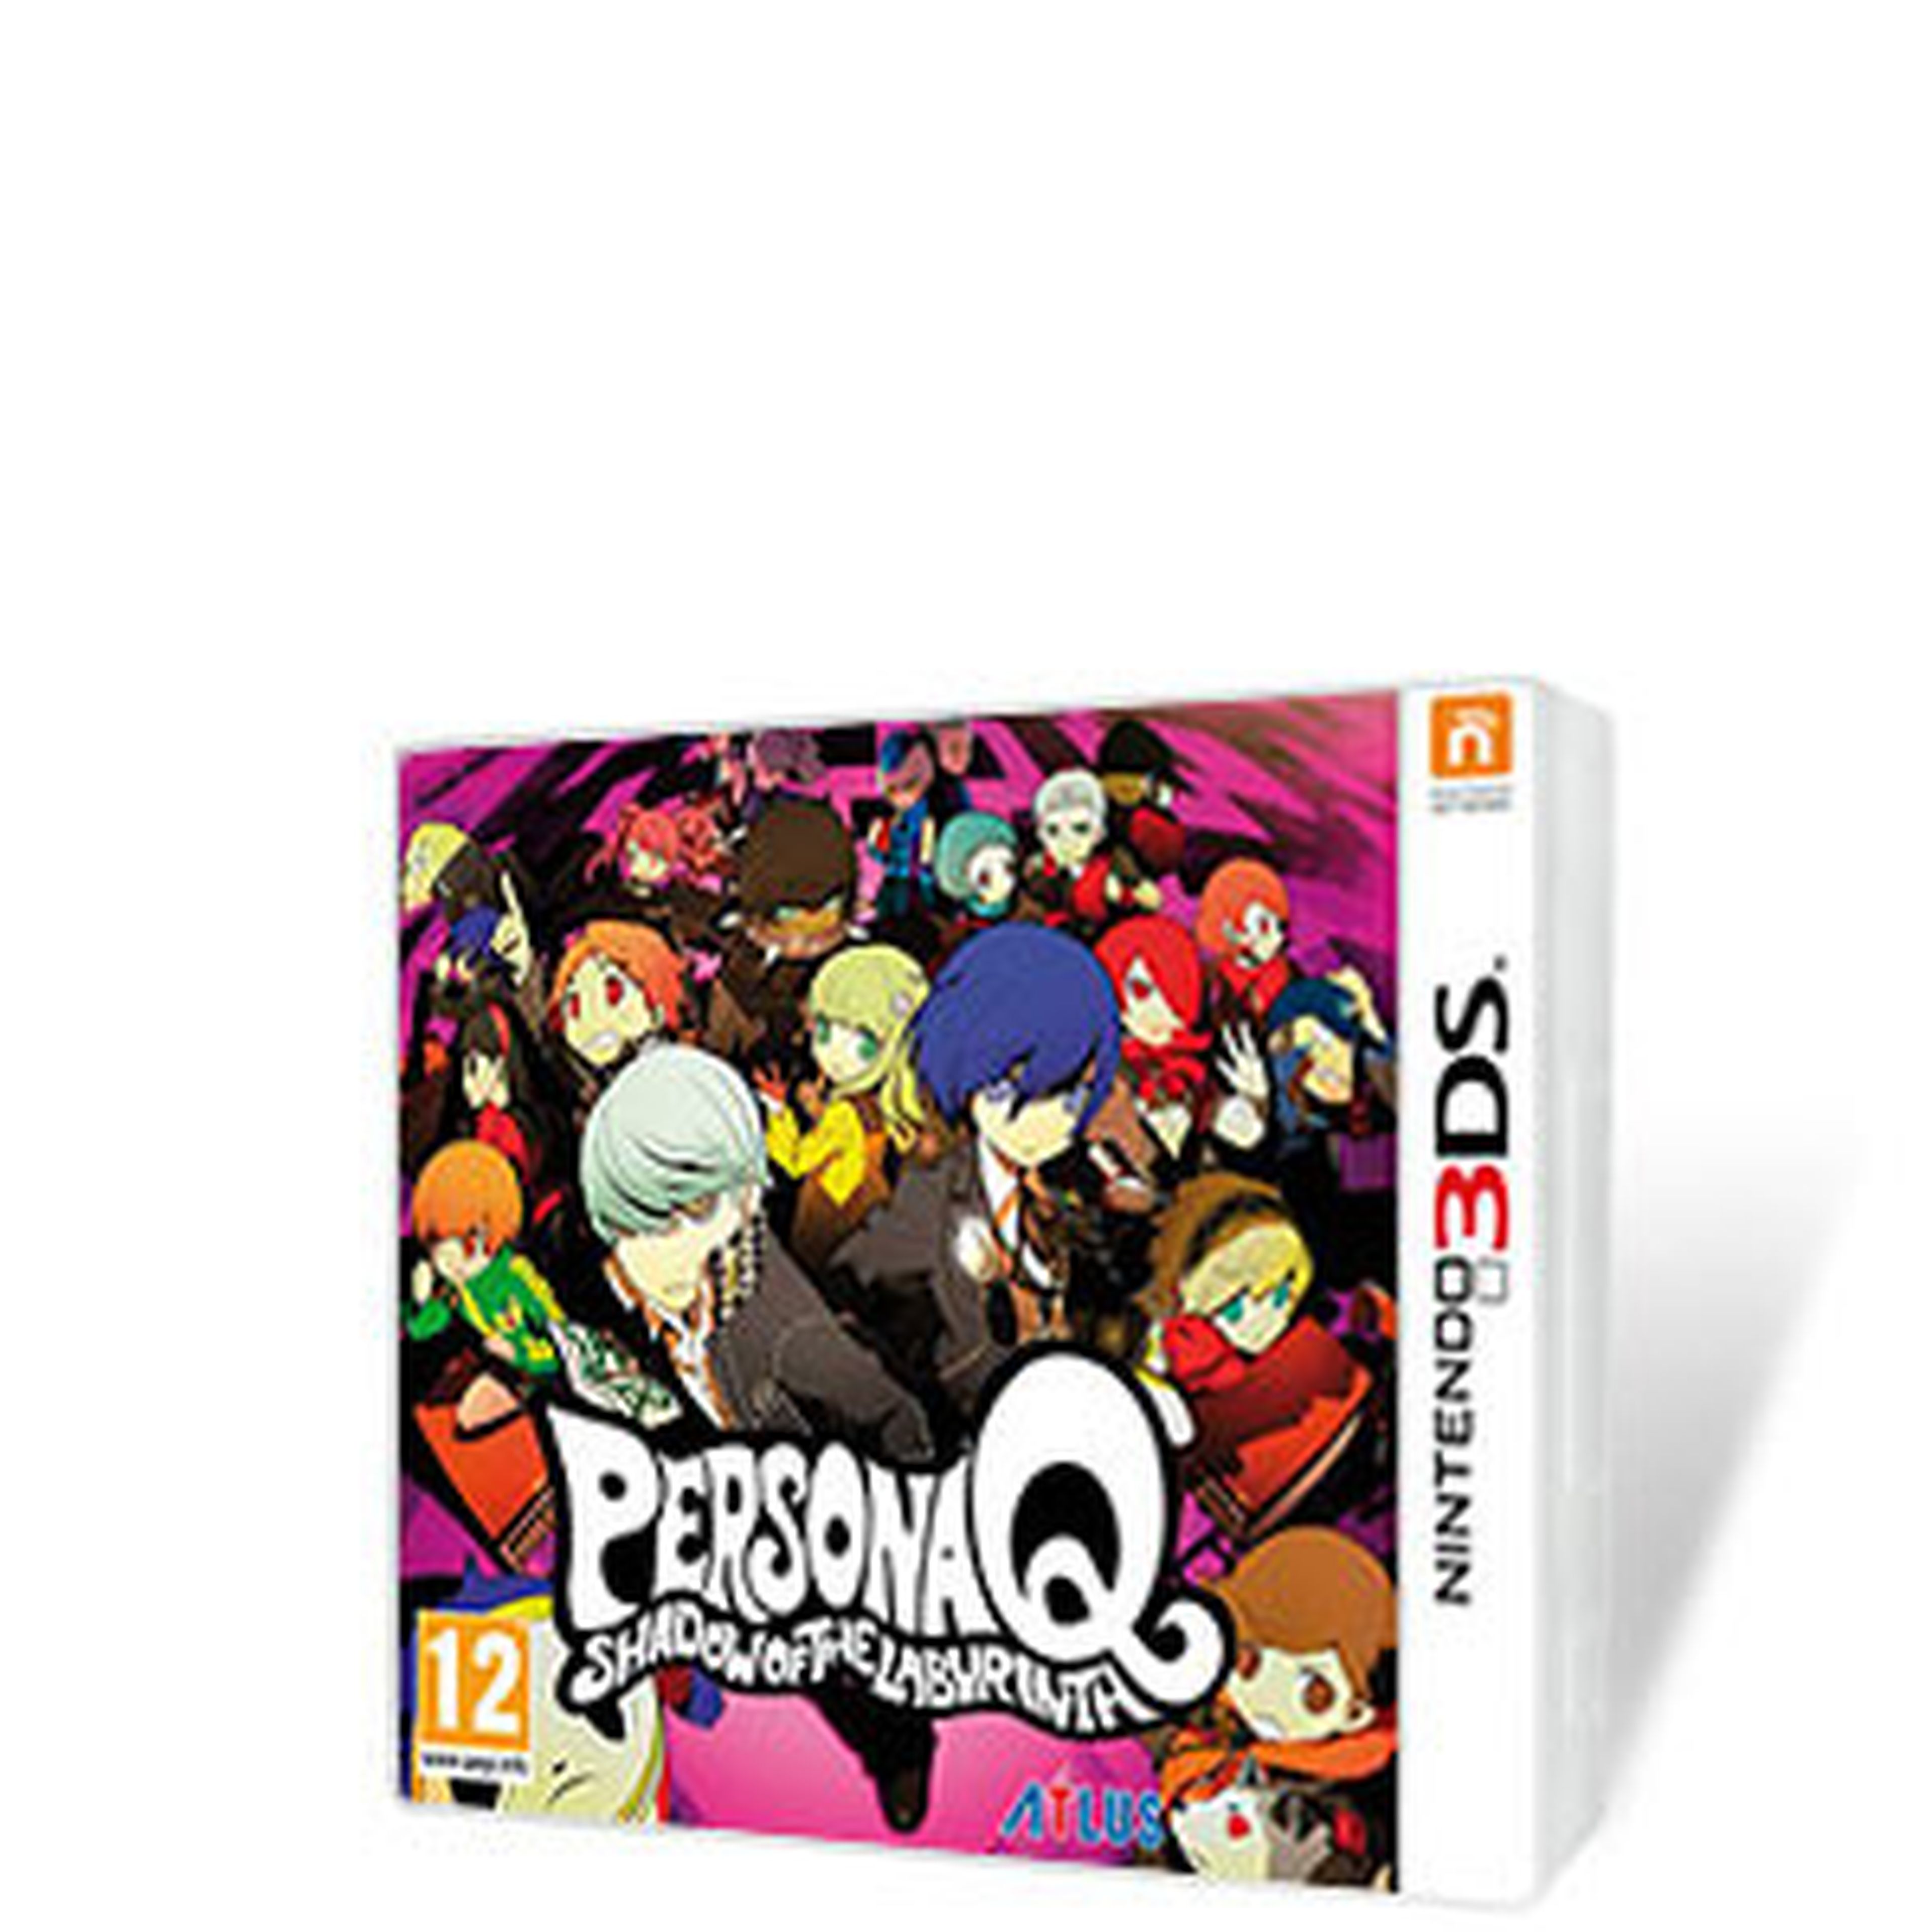 Persona Q Shadow of the Labyrinth para 3DS